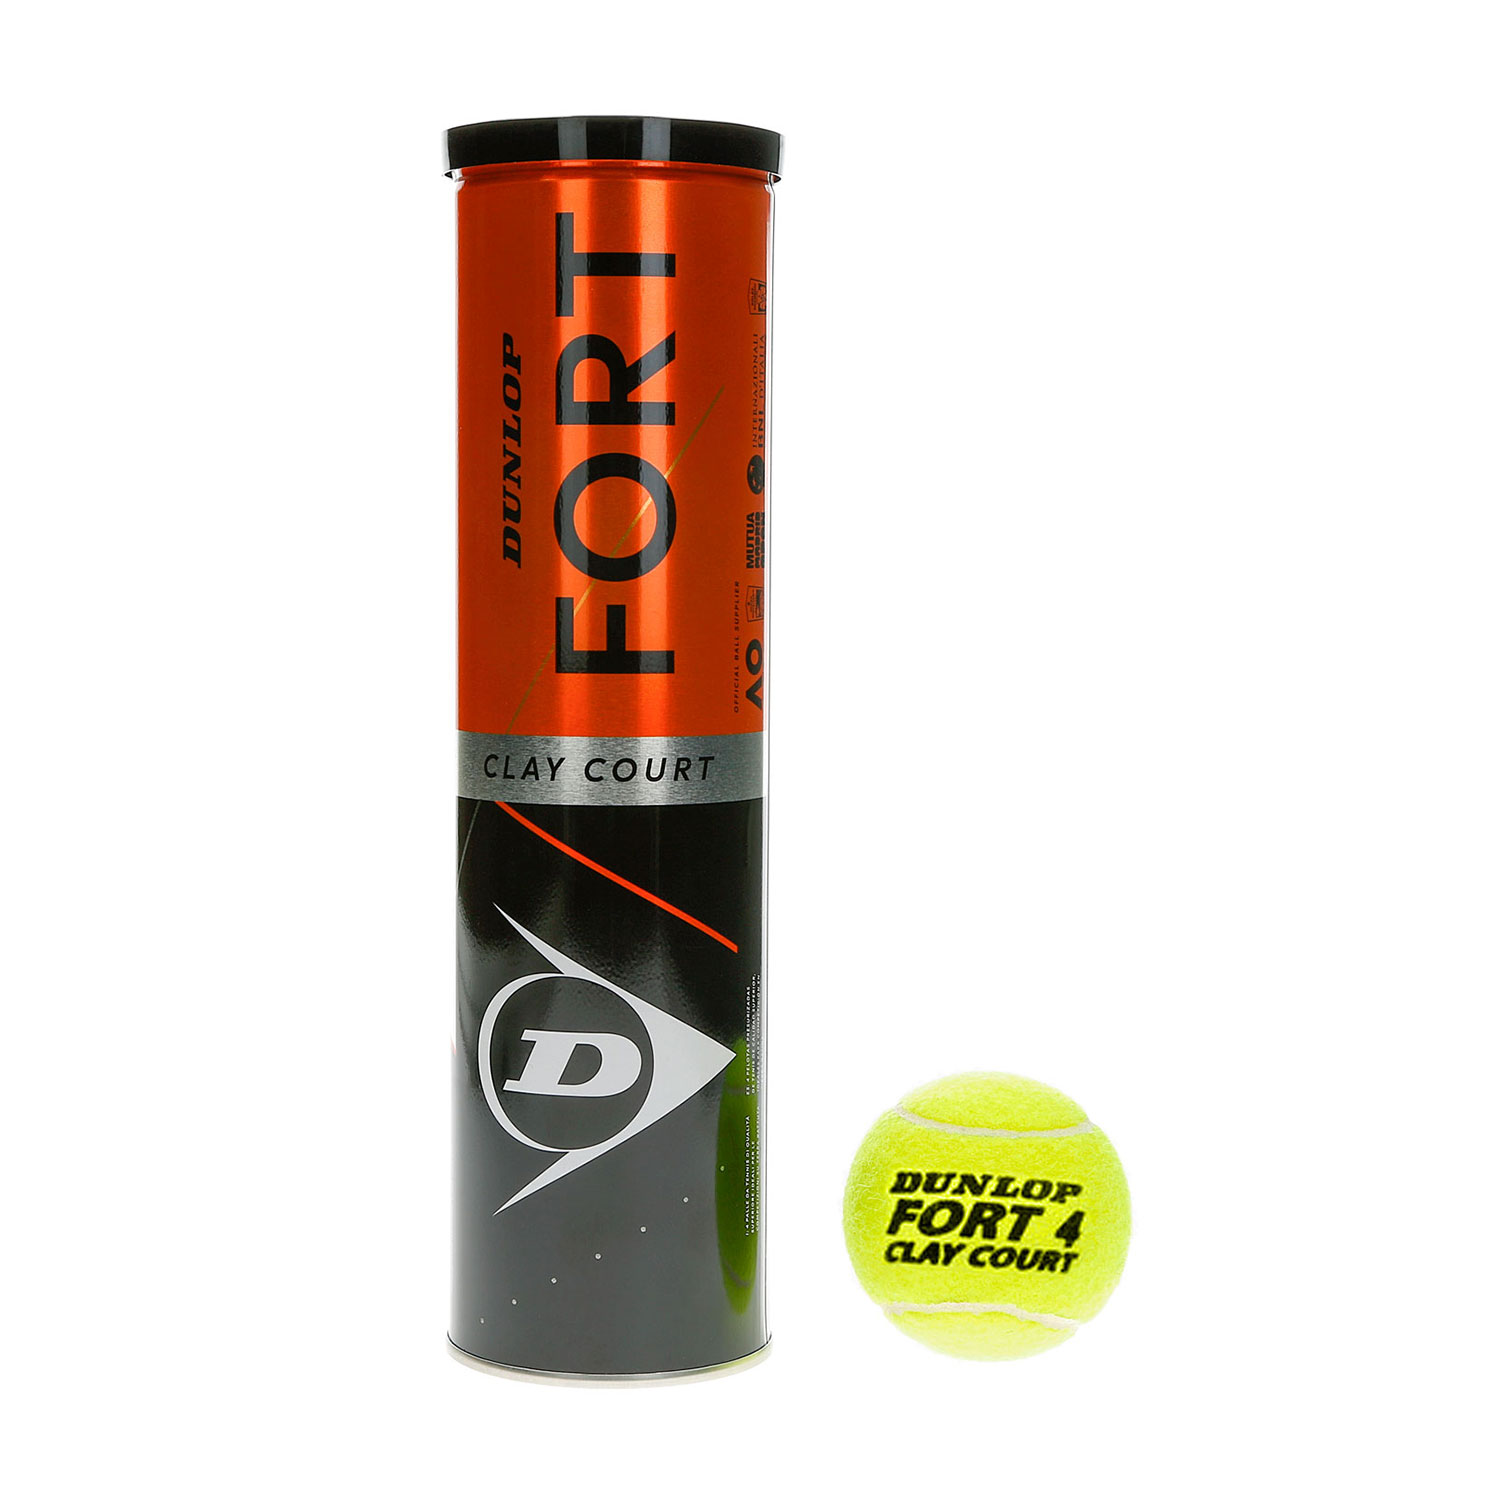 Dunlop Fort Clay Court - 4 Ball Can